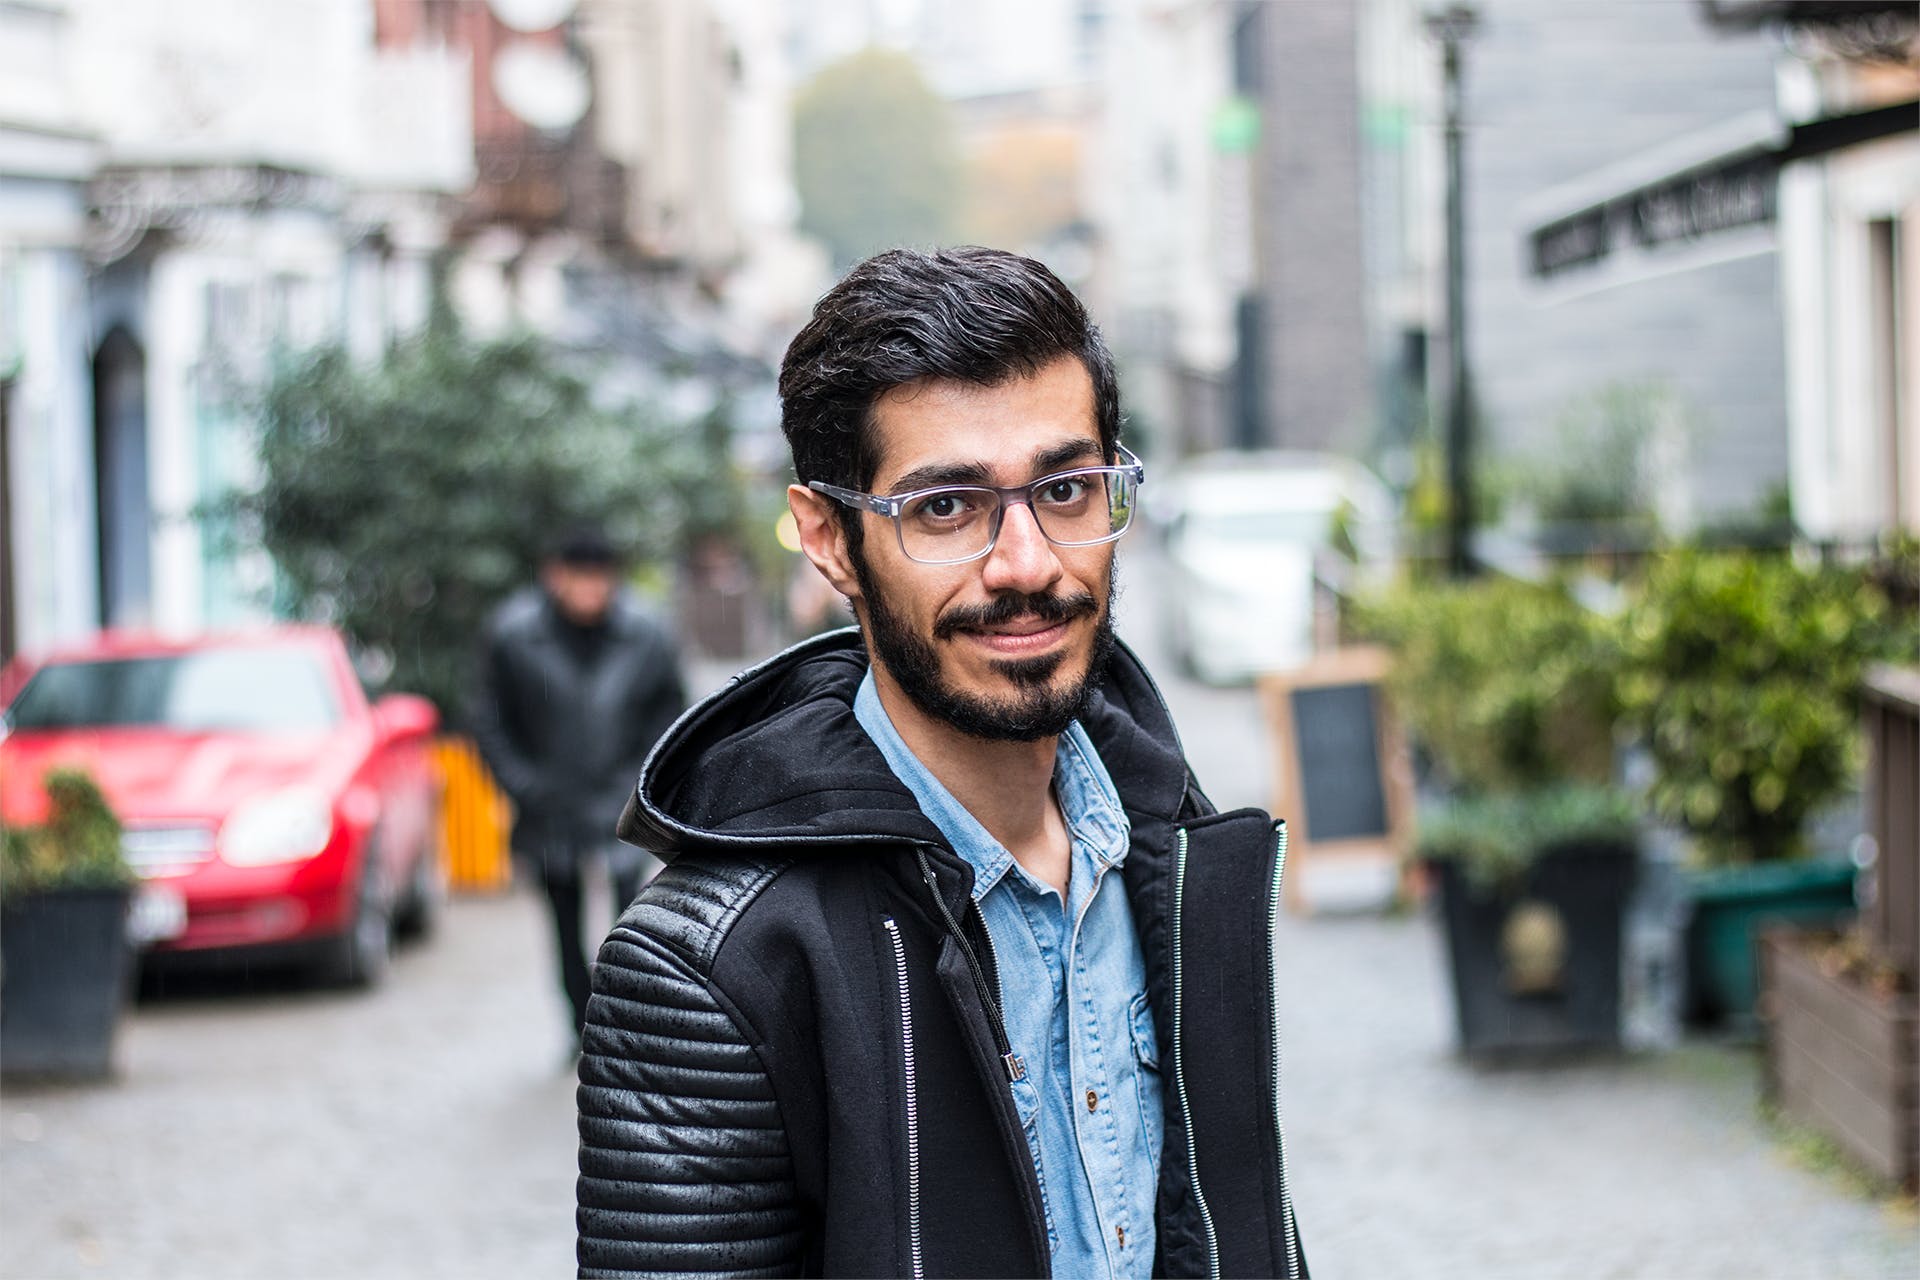 A man wearing glasses while walking on a street | Source: Pexels